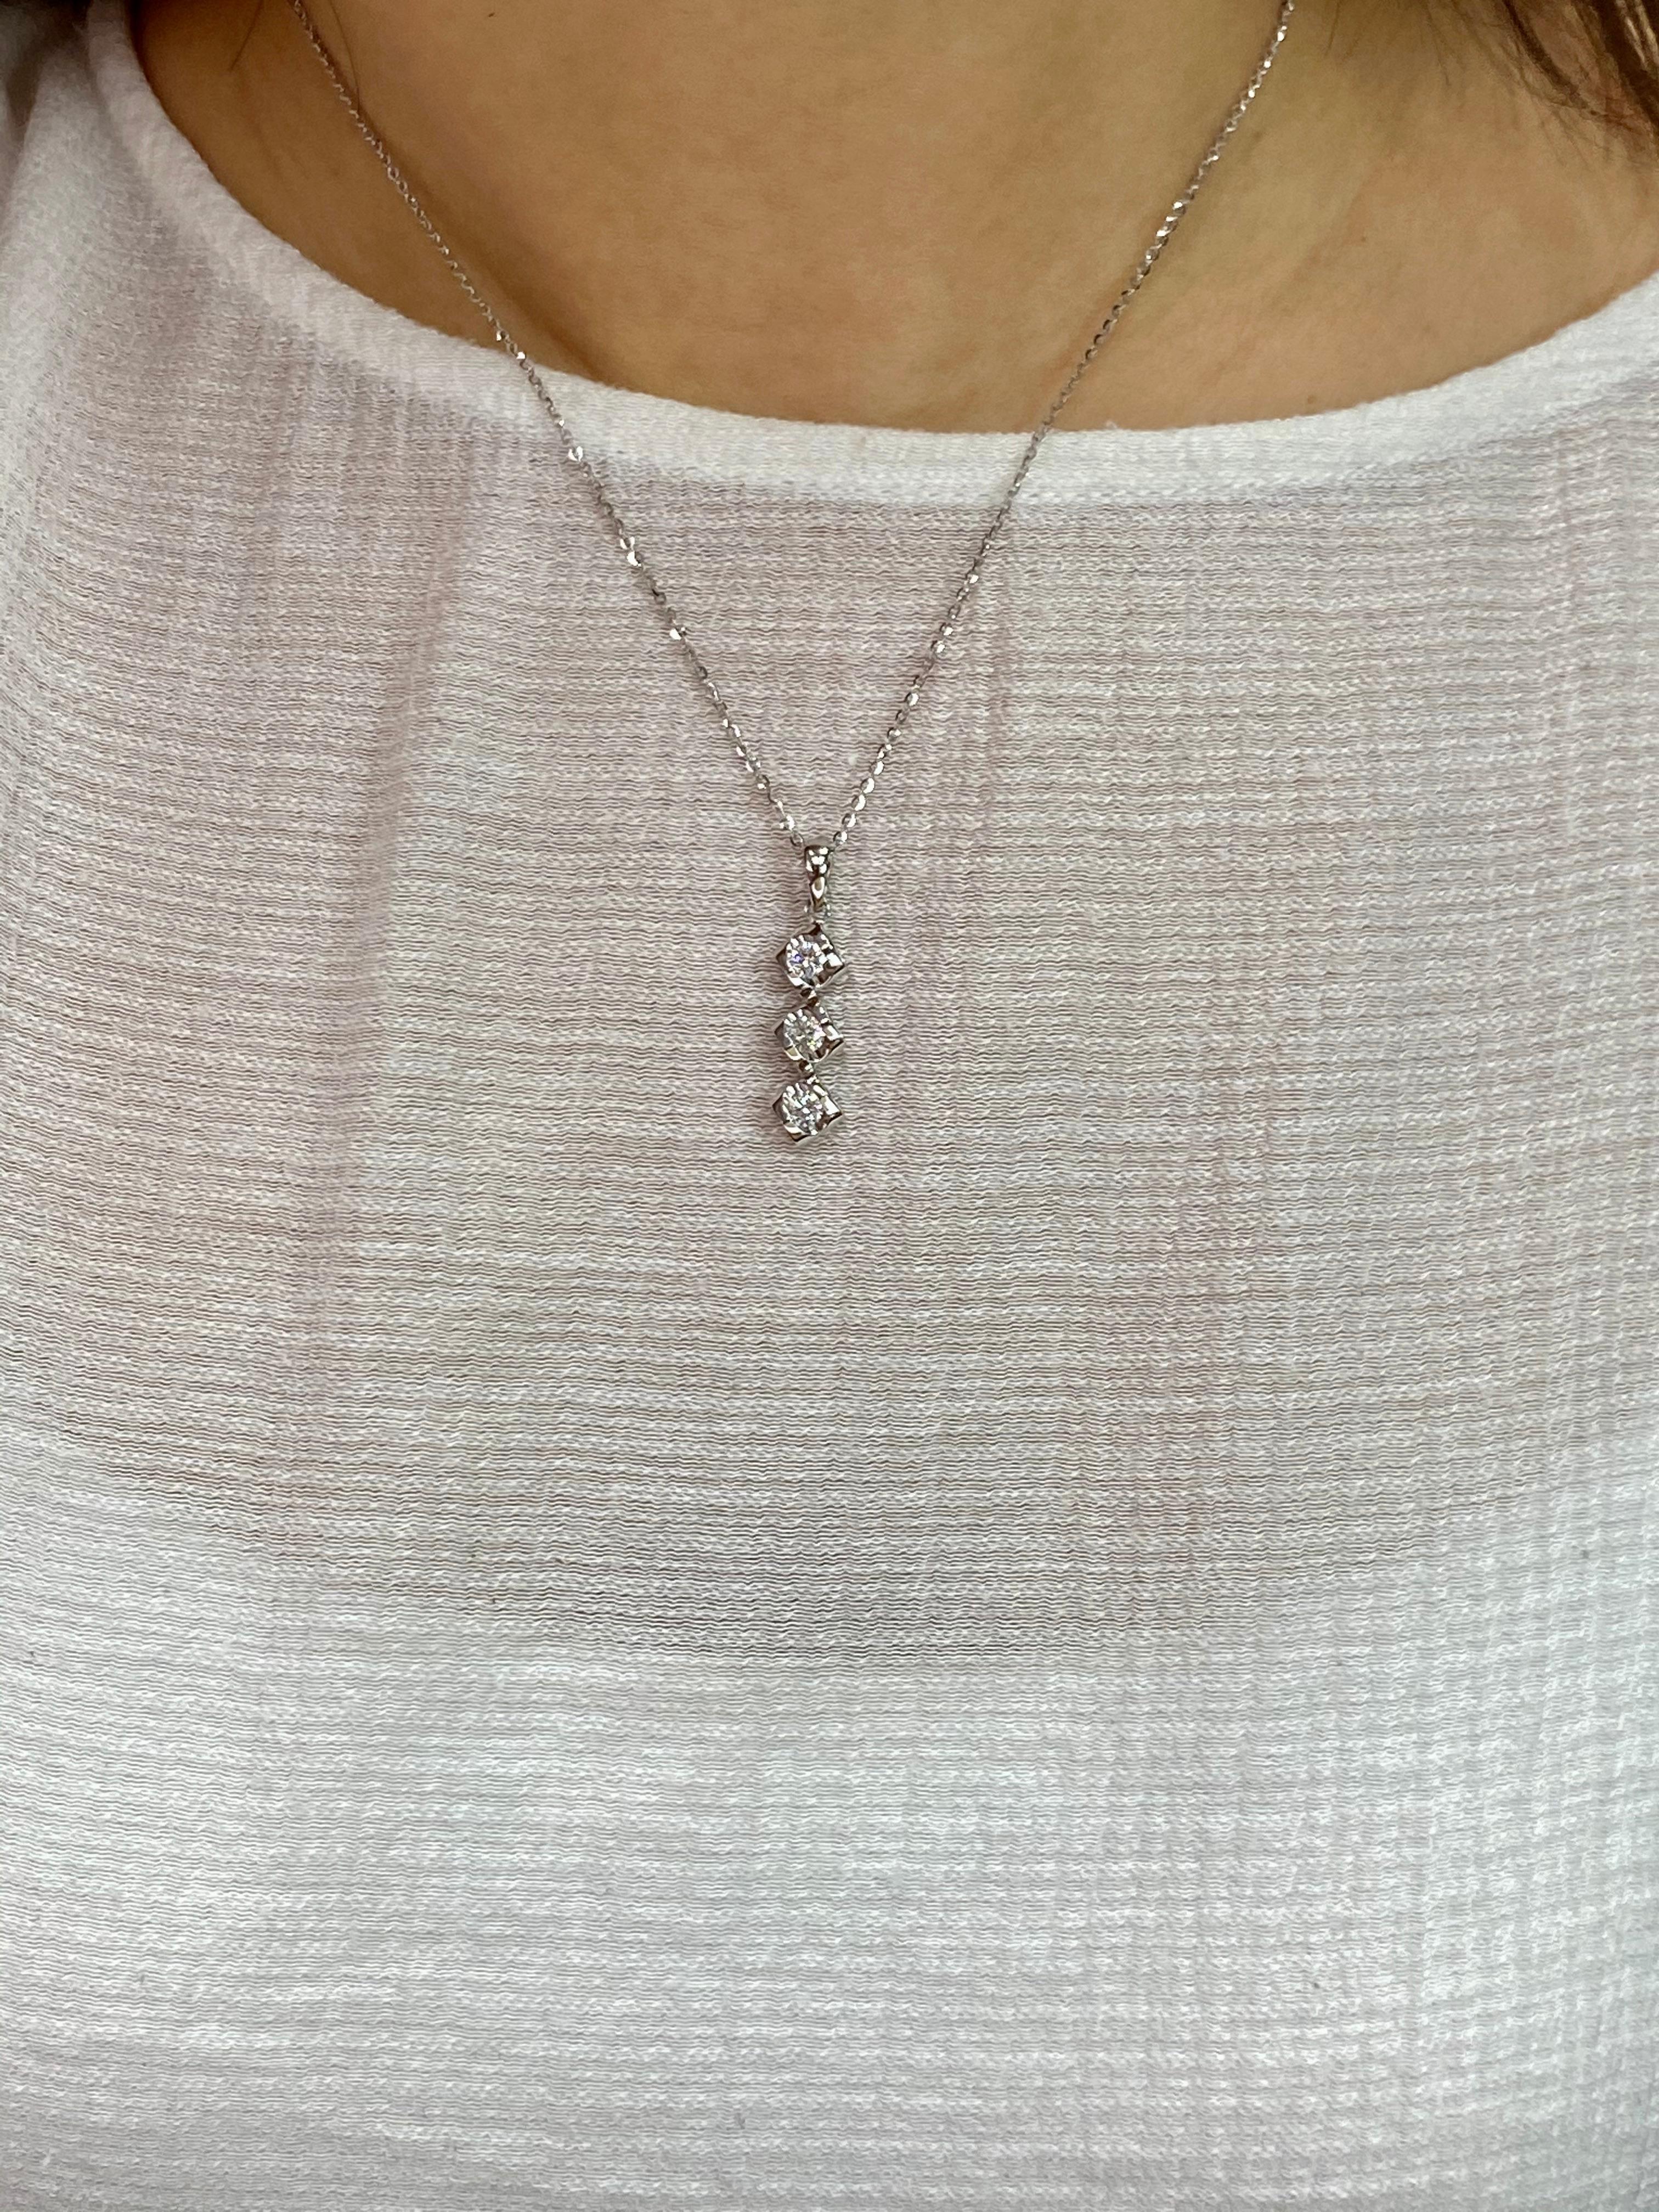 Here is a nice diamond pendant. The pendant is set in 18k white gold and diamonds. There are 3 diamonds totaling 0.50 cts. Each diamond is about 0.16Cts. It sparkles with fire. The pendant is beautiful with heart shaped motifs on the sides.  Photos